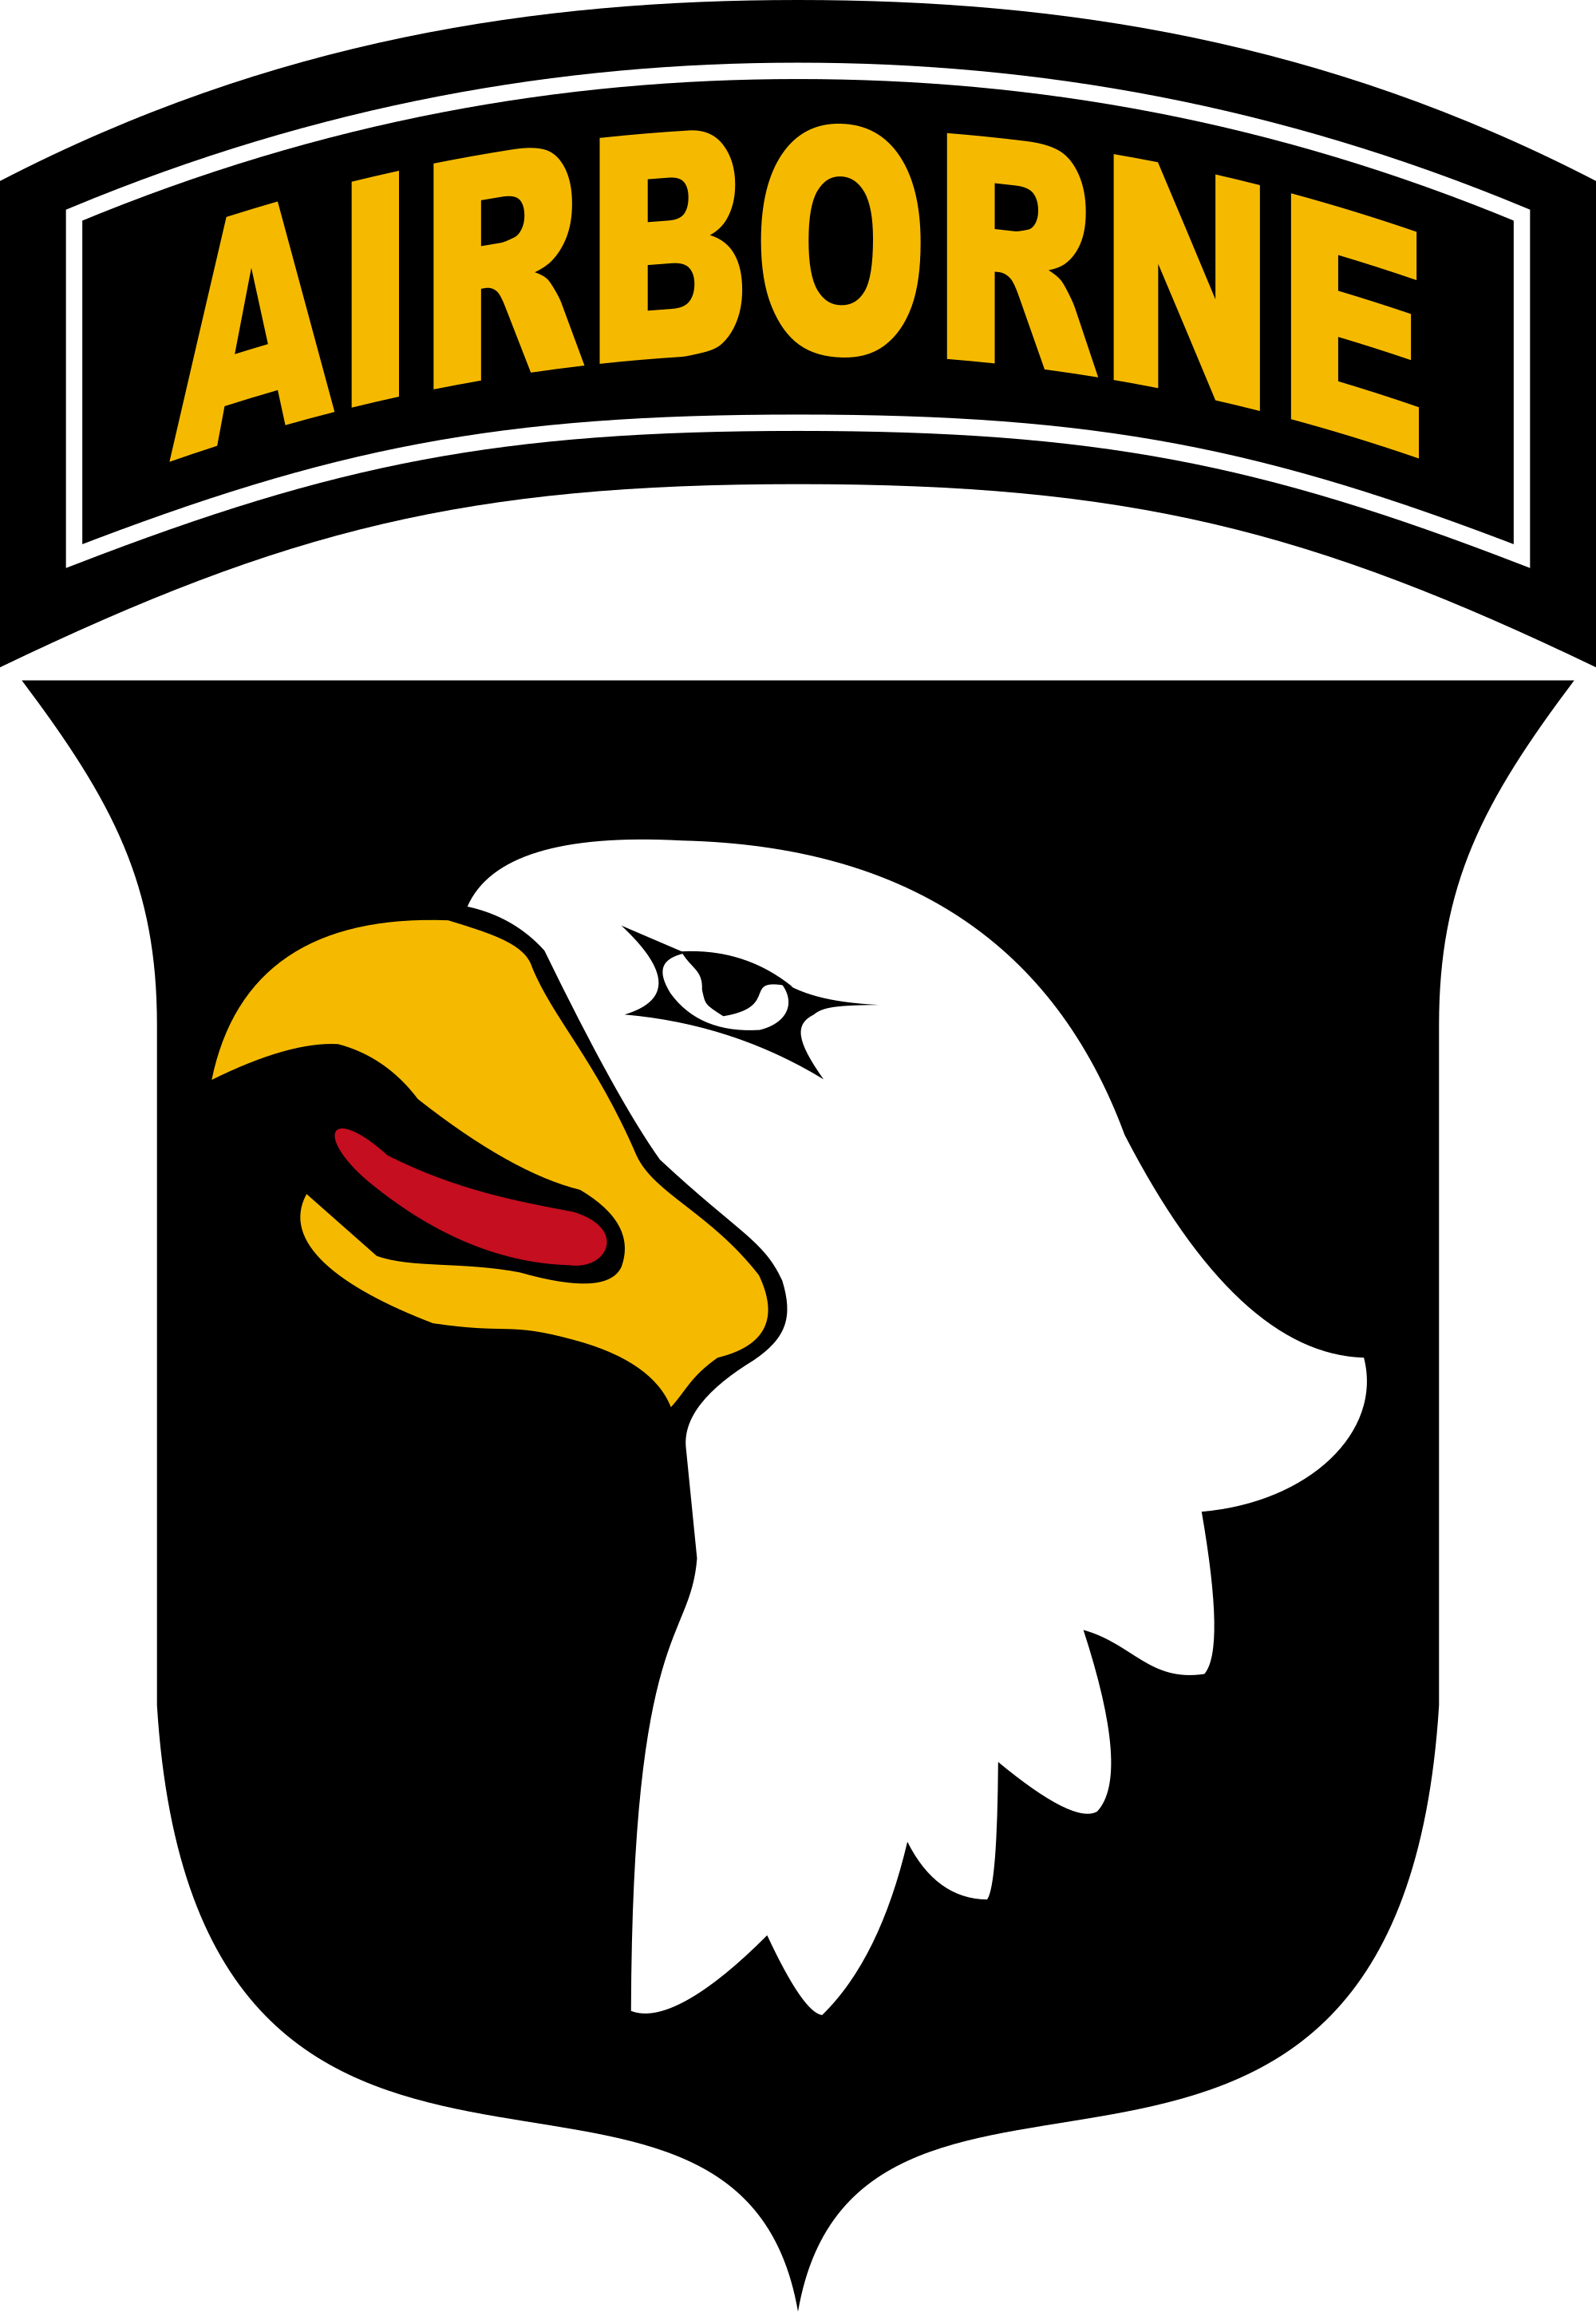 101st Airborne Division Patch (2000x2902)